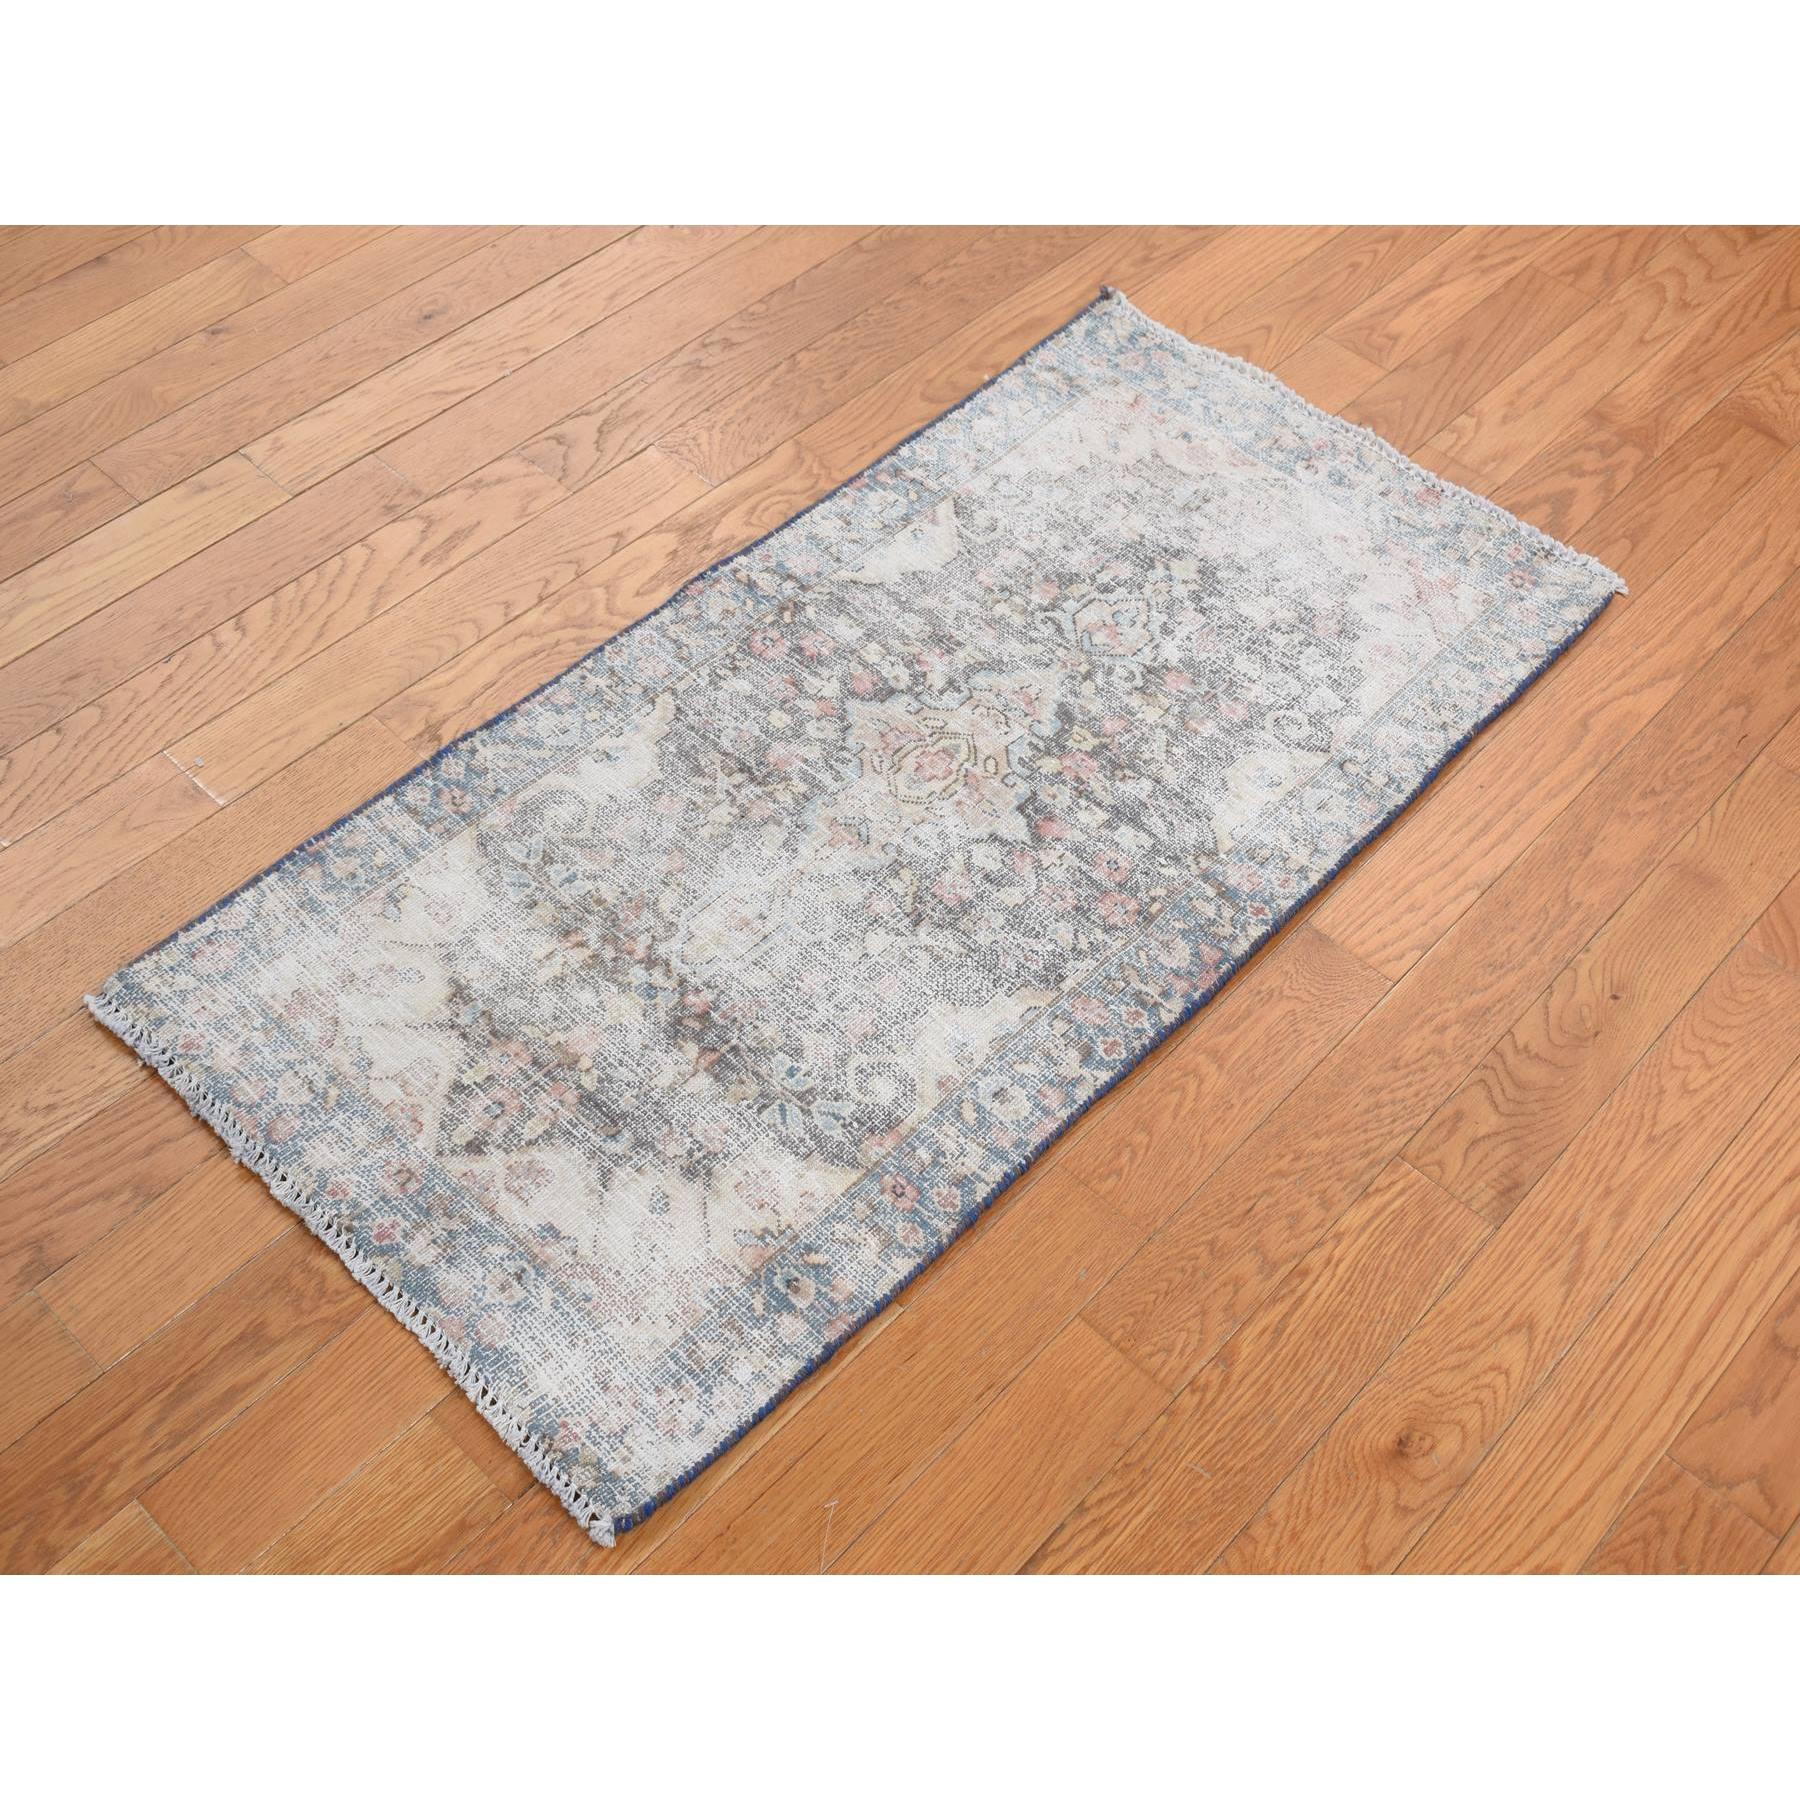 This fabulous Hand-Knotted carpet has been created and designed for extra strength and durability. This rug has been handcrafted for weeks in the traditional method that is used to make
Exact Rug Size in Feet and Inches : 1'10